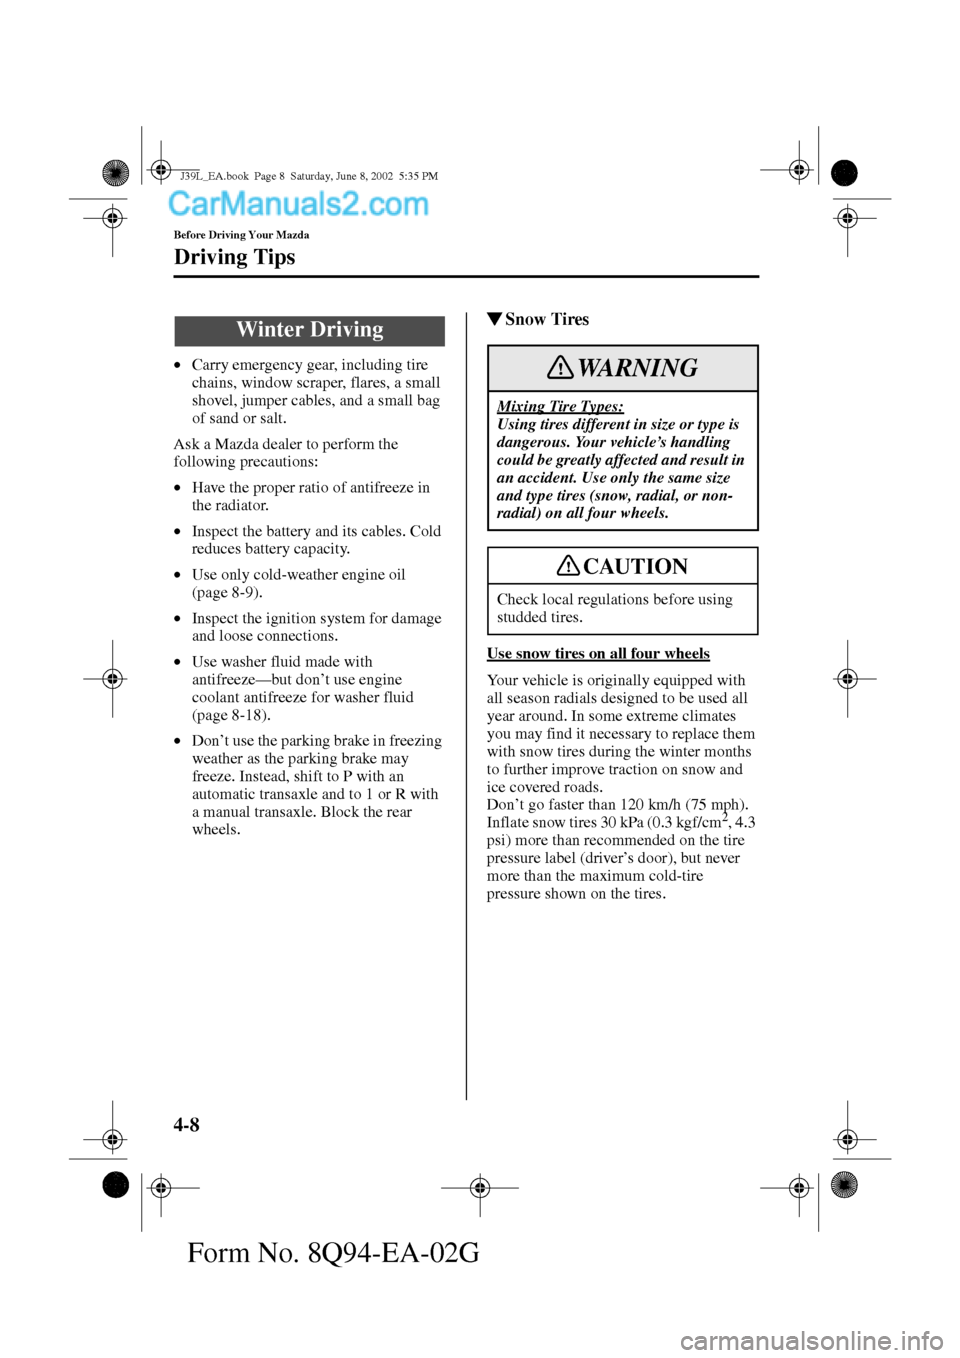 MAZDA MODEL PROTÉGÉ 2003  Owners Manual (in English) 4-8
Before Driving Your Mazda
Driving Tips
Form No. 8Q94-EA-02G
•Carry emergency gear, including tire 
chains, window scraper, flares, a small 
shovel, jumper cables, and a small bag 
of sand or sal